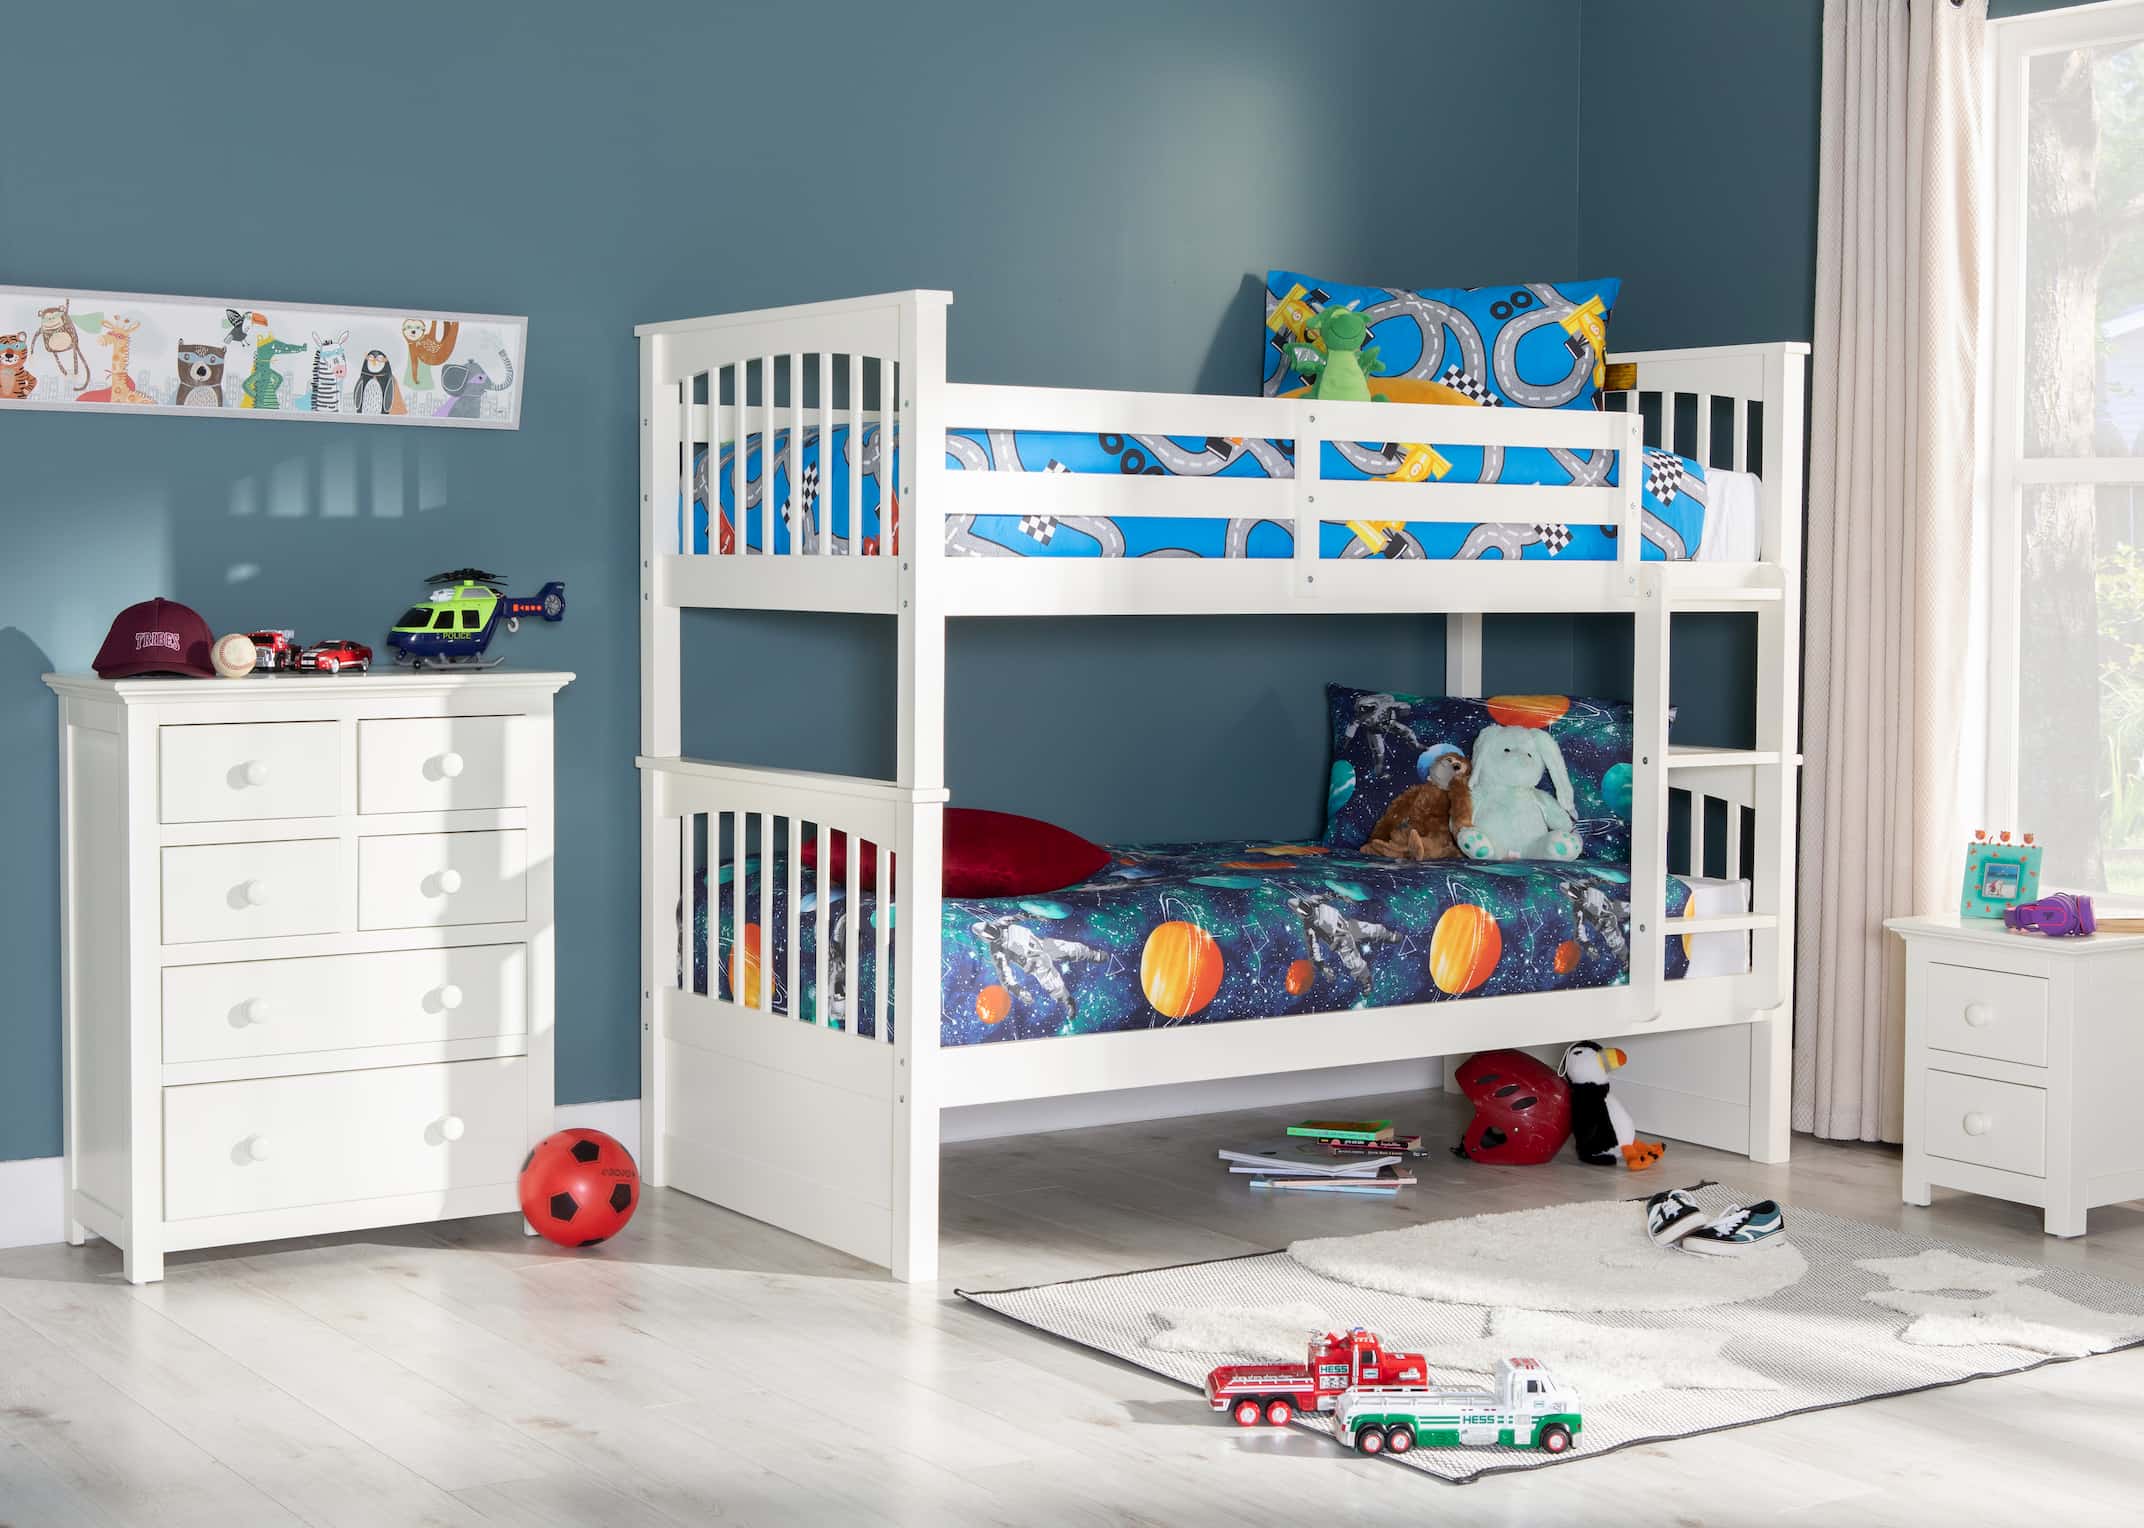 Bunk Beds Children S Furniture, 4ft 6 Bunk Beds With Storage